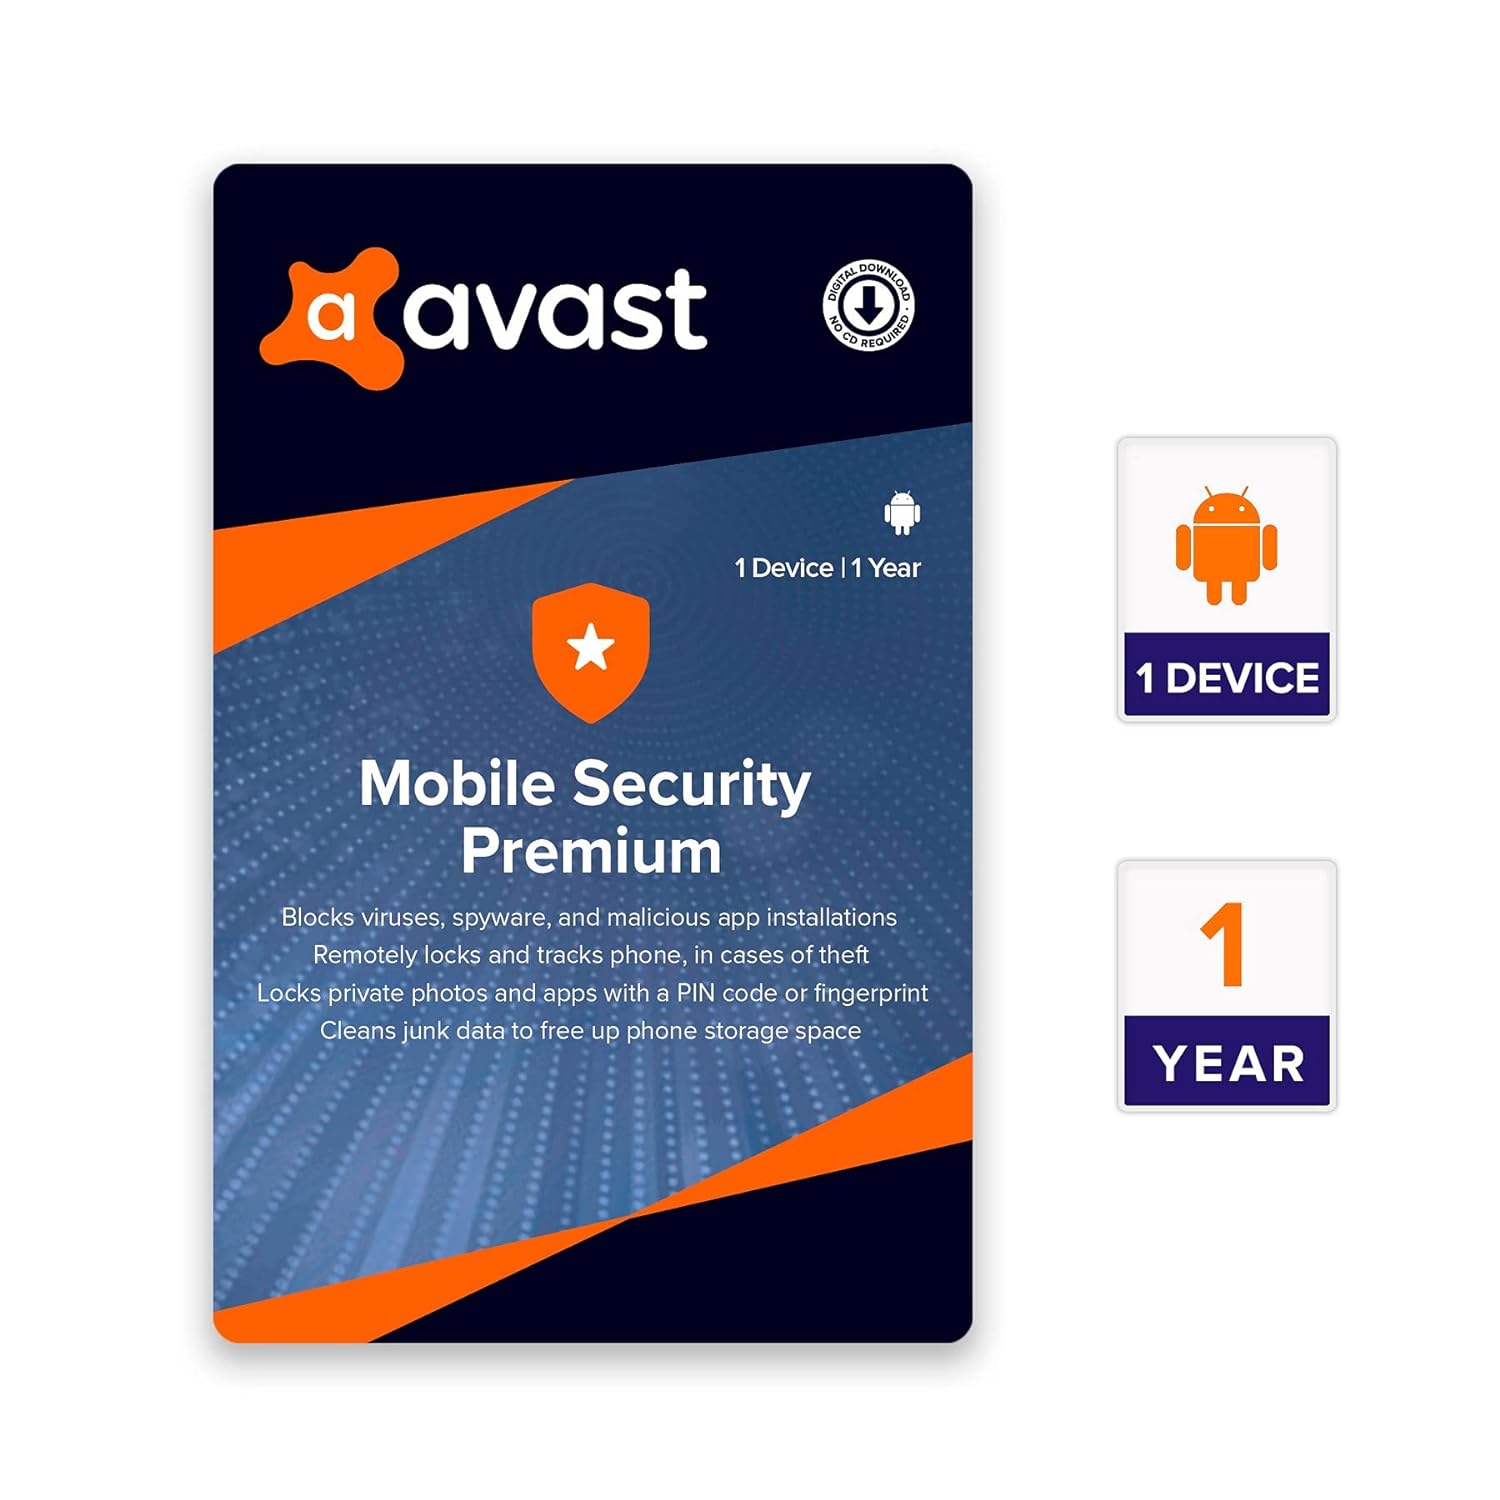 (7.41$) Avast Ultimate Mobile Security Premium for Android 2023 Key (1 Year / 1 Device)